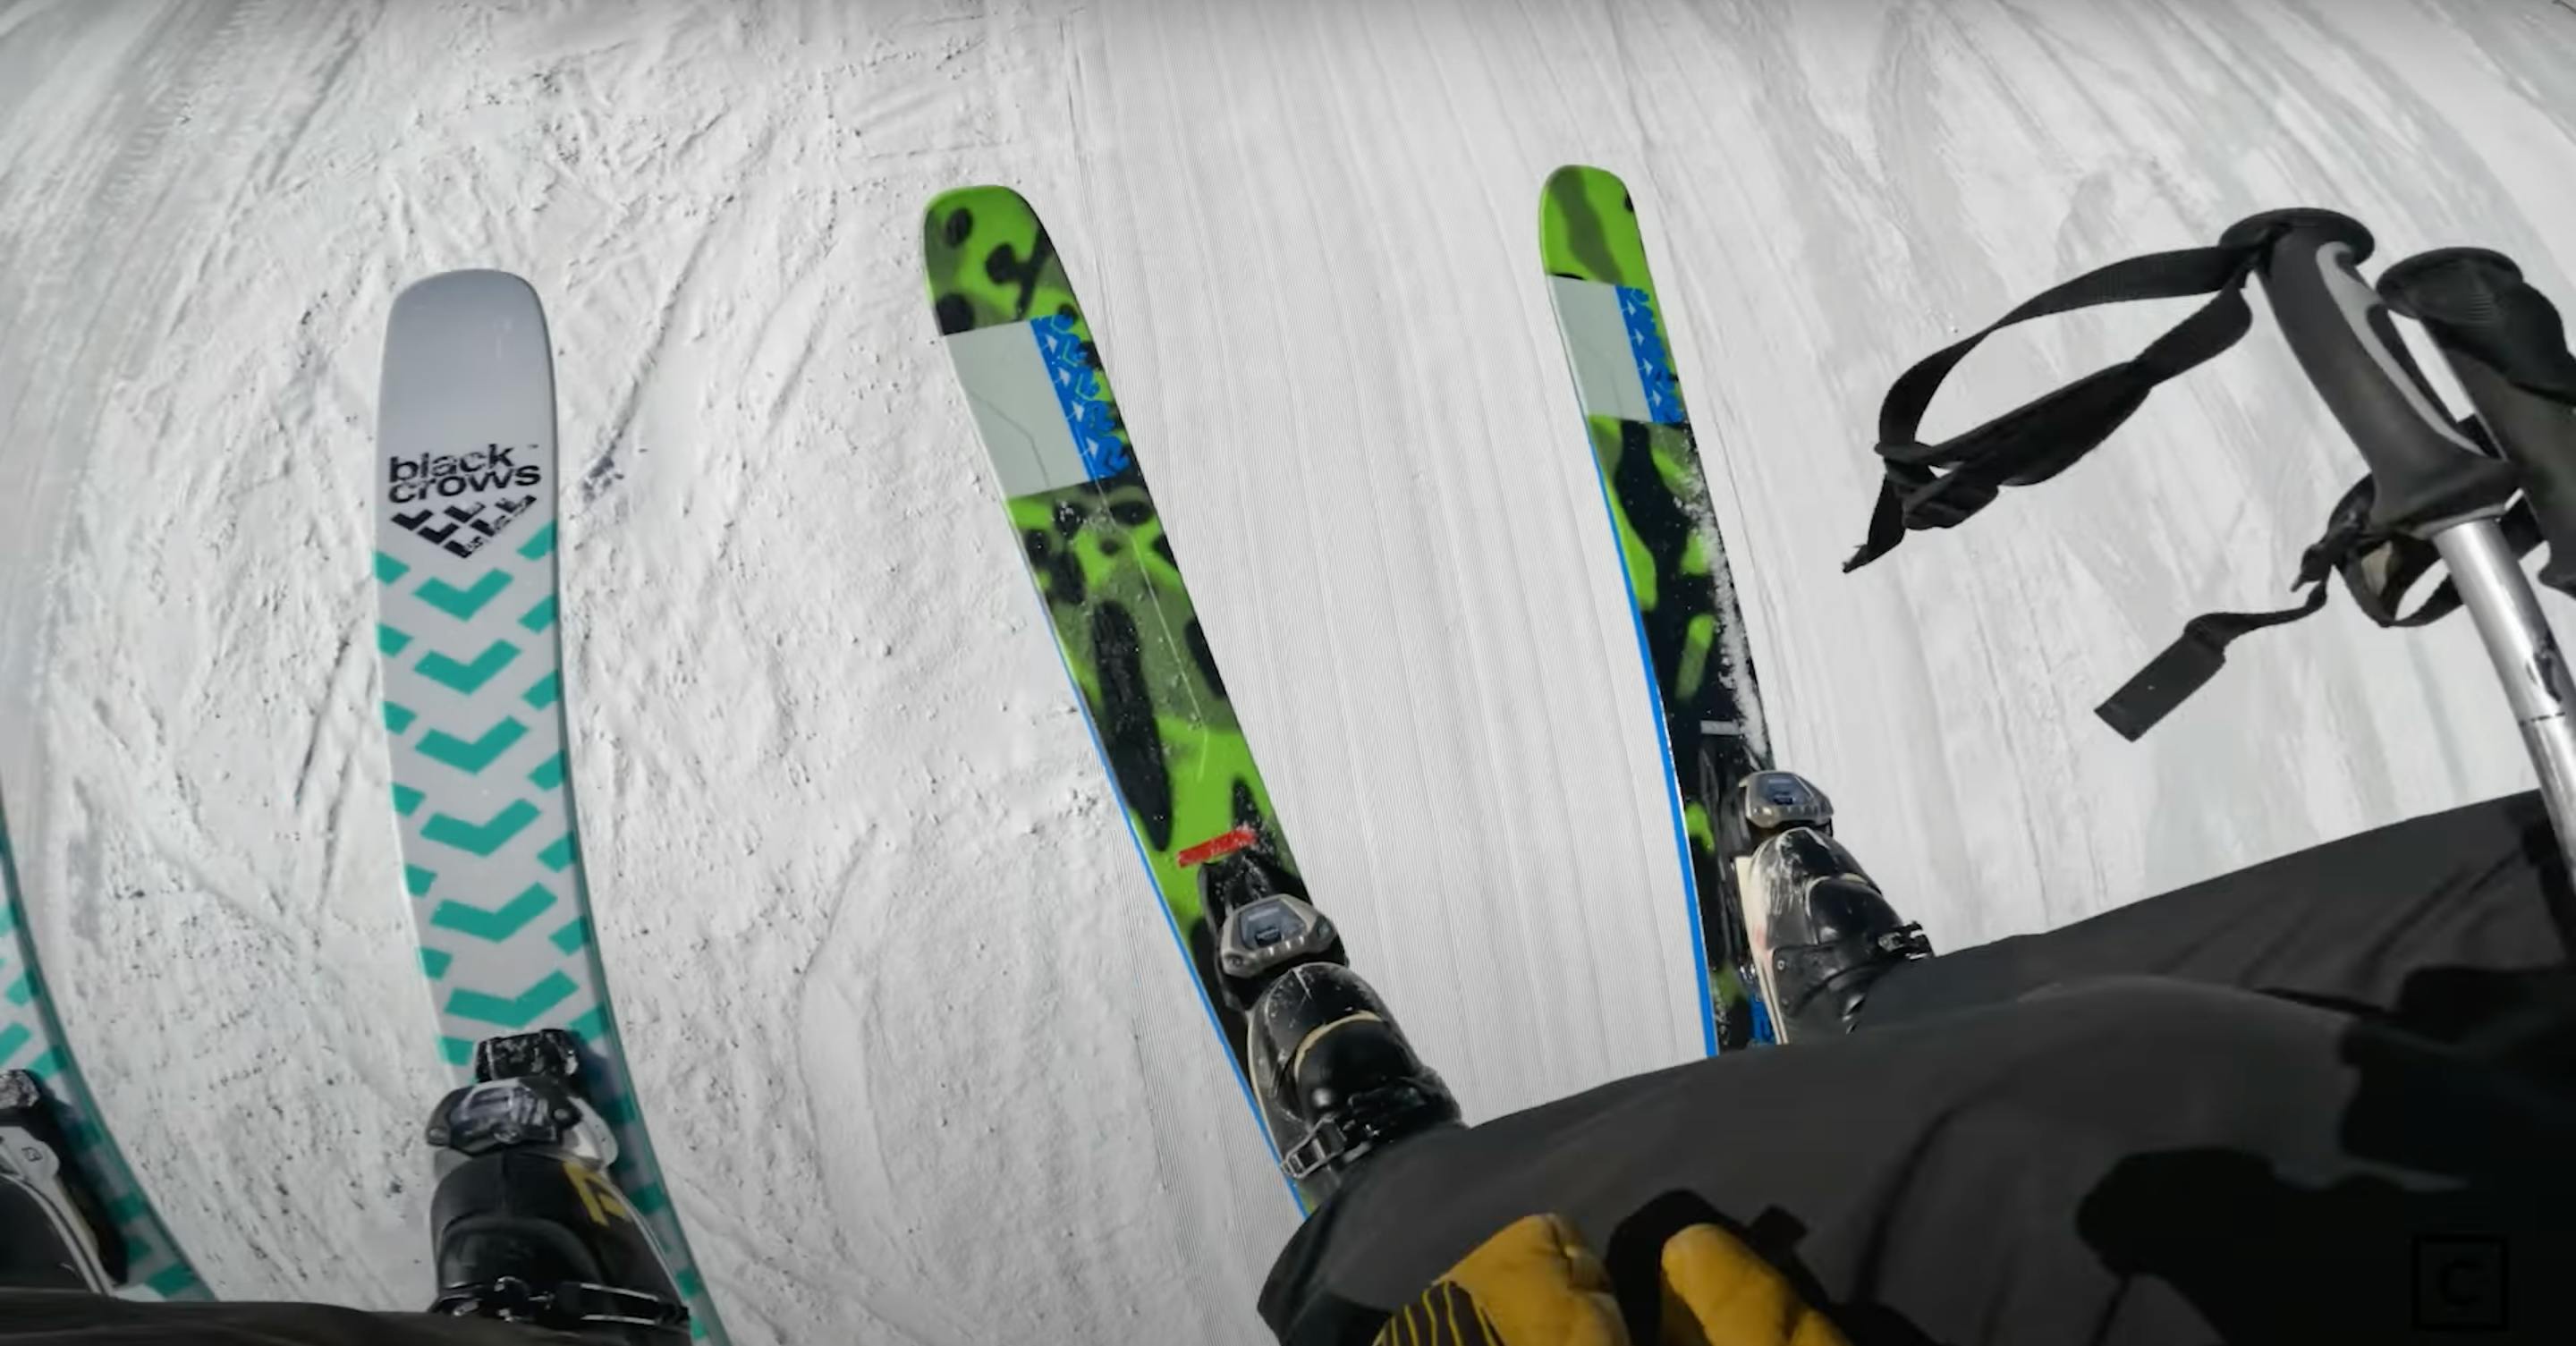 Top down view of the Black Crow Atris skis and the Mindbenders 108 Tis. 